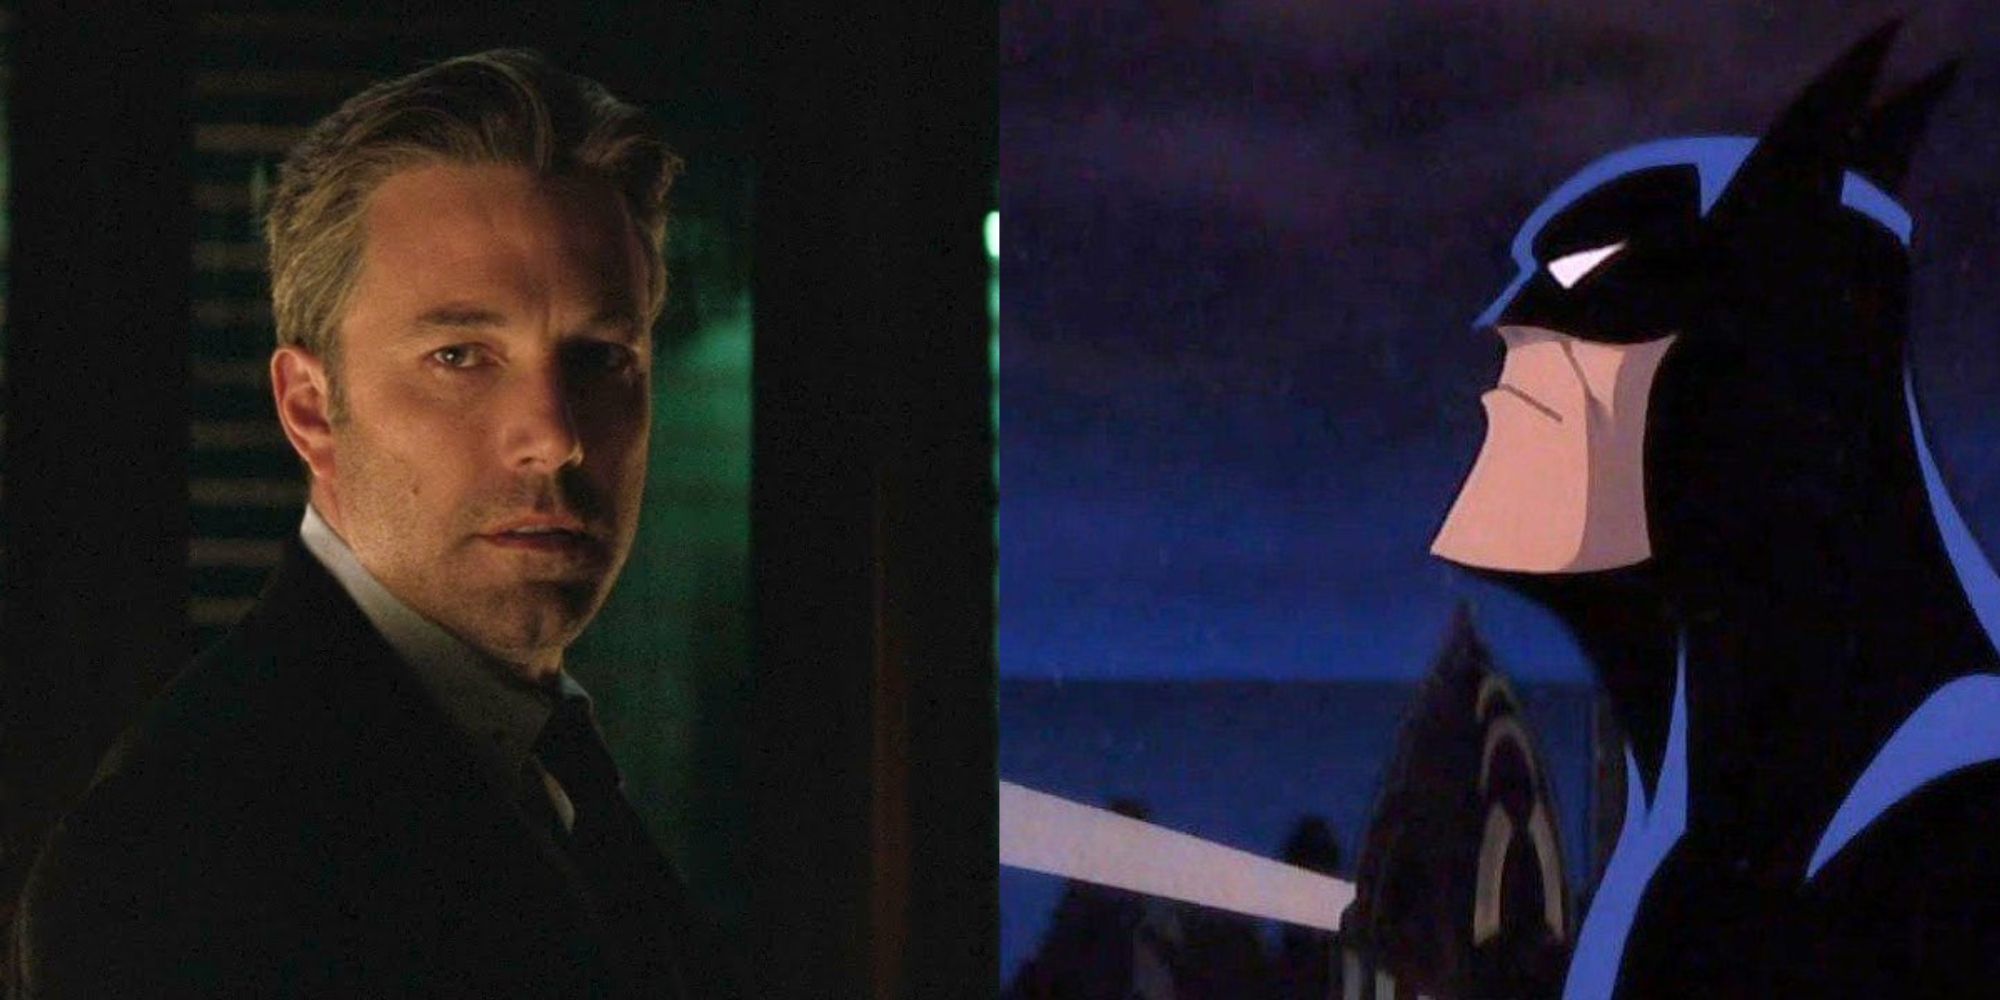 Split images of Bruce Wayne turning around in Suicide Squad and Batman looking up in Mask of the Phantasm